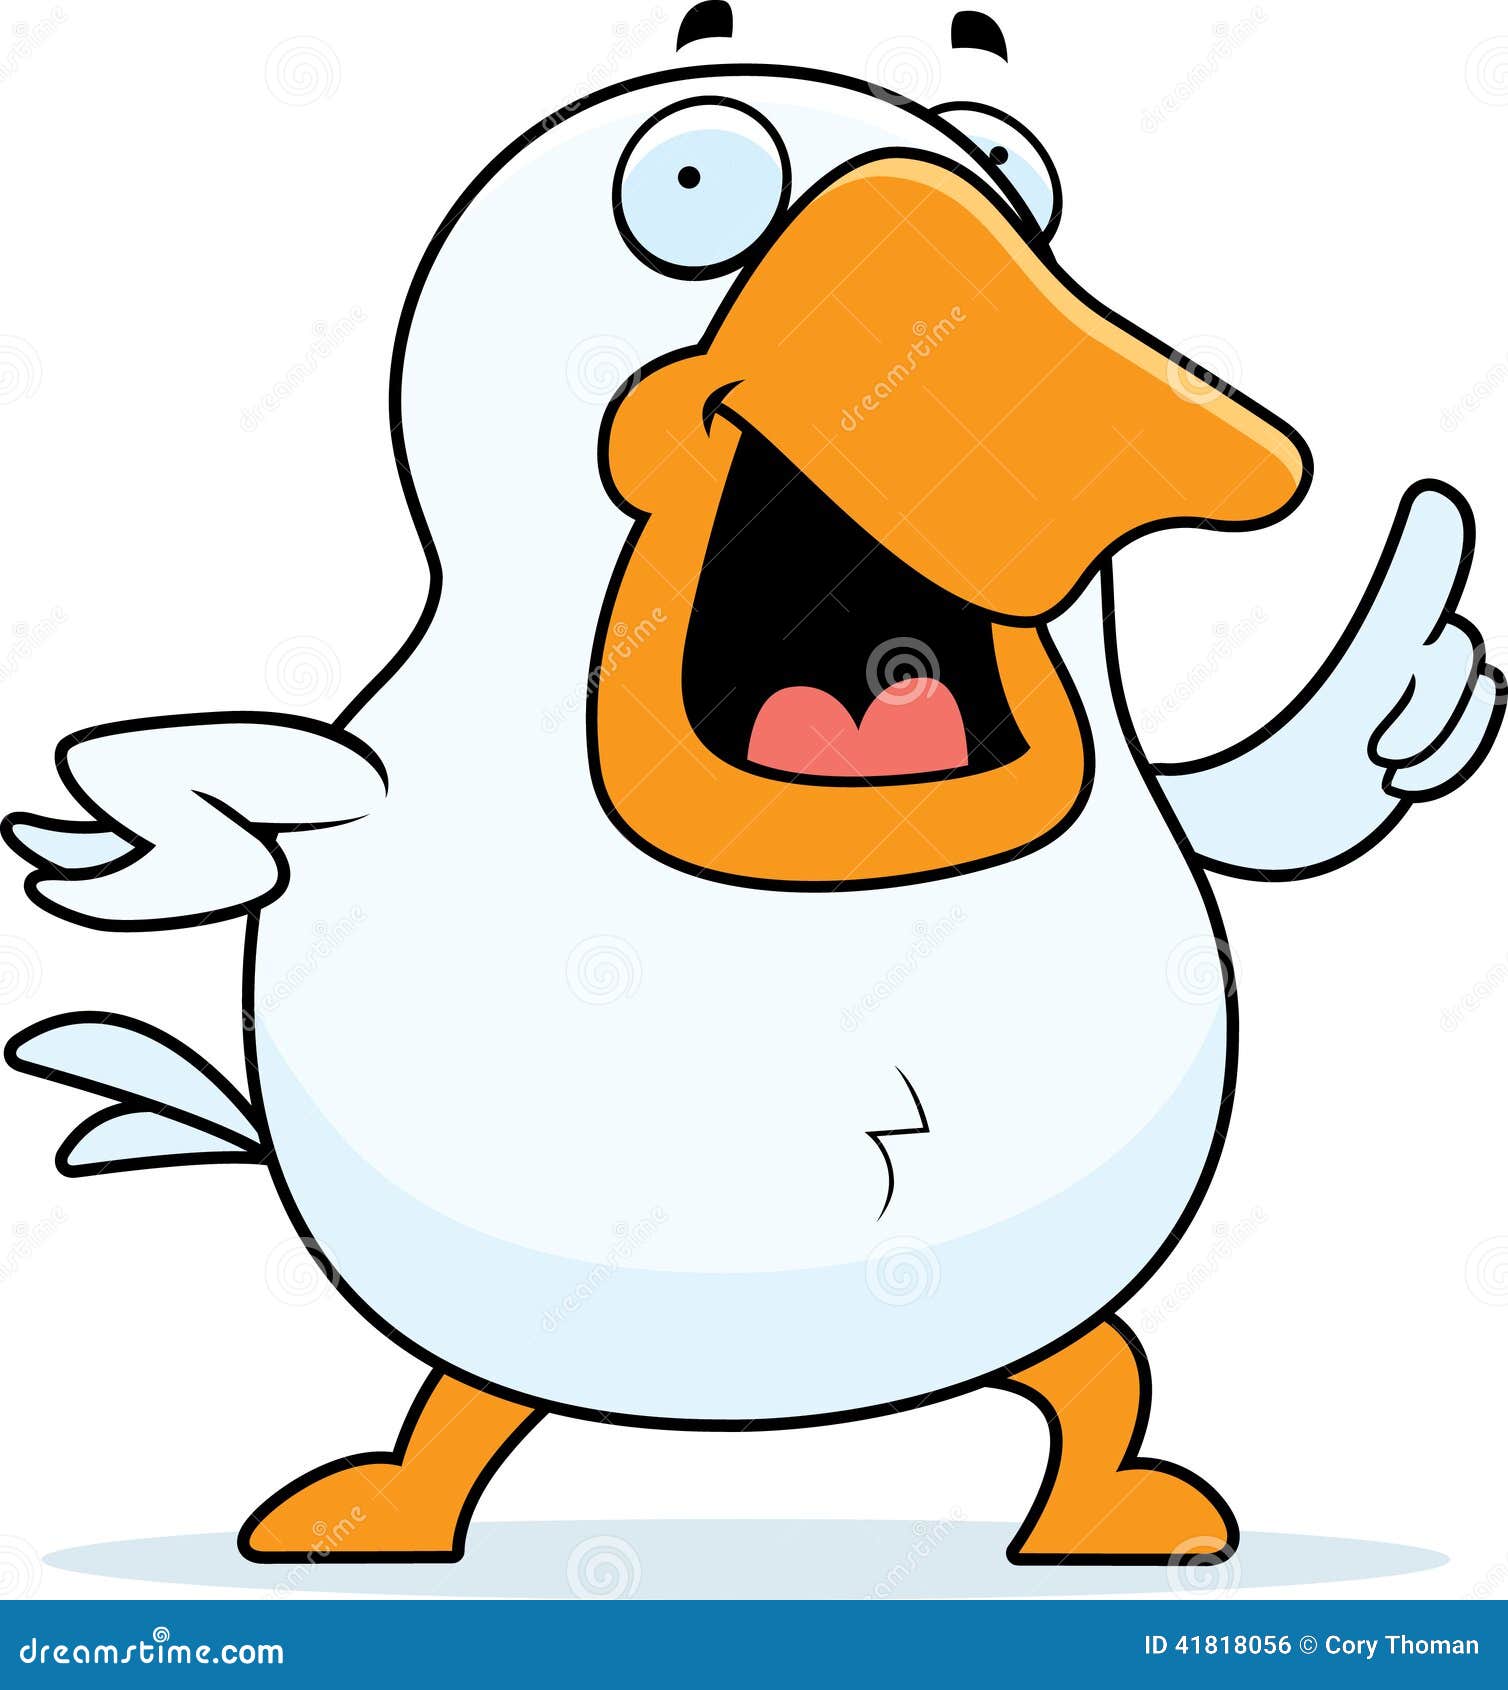 clipart cooked goose - photo #29